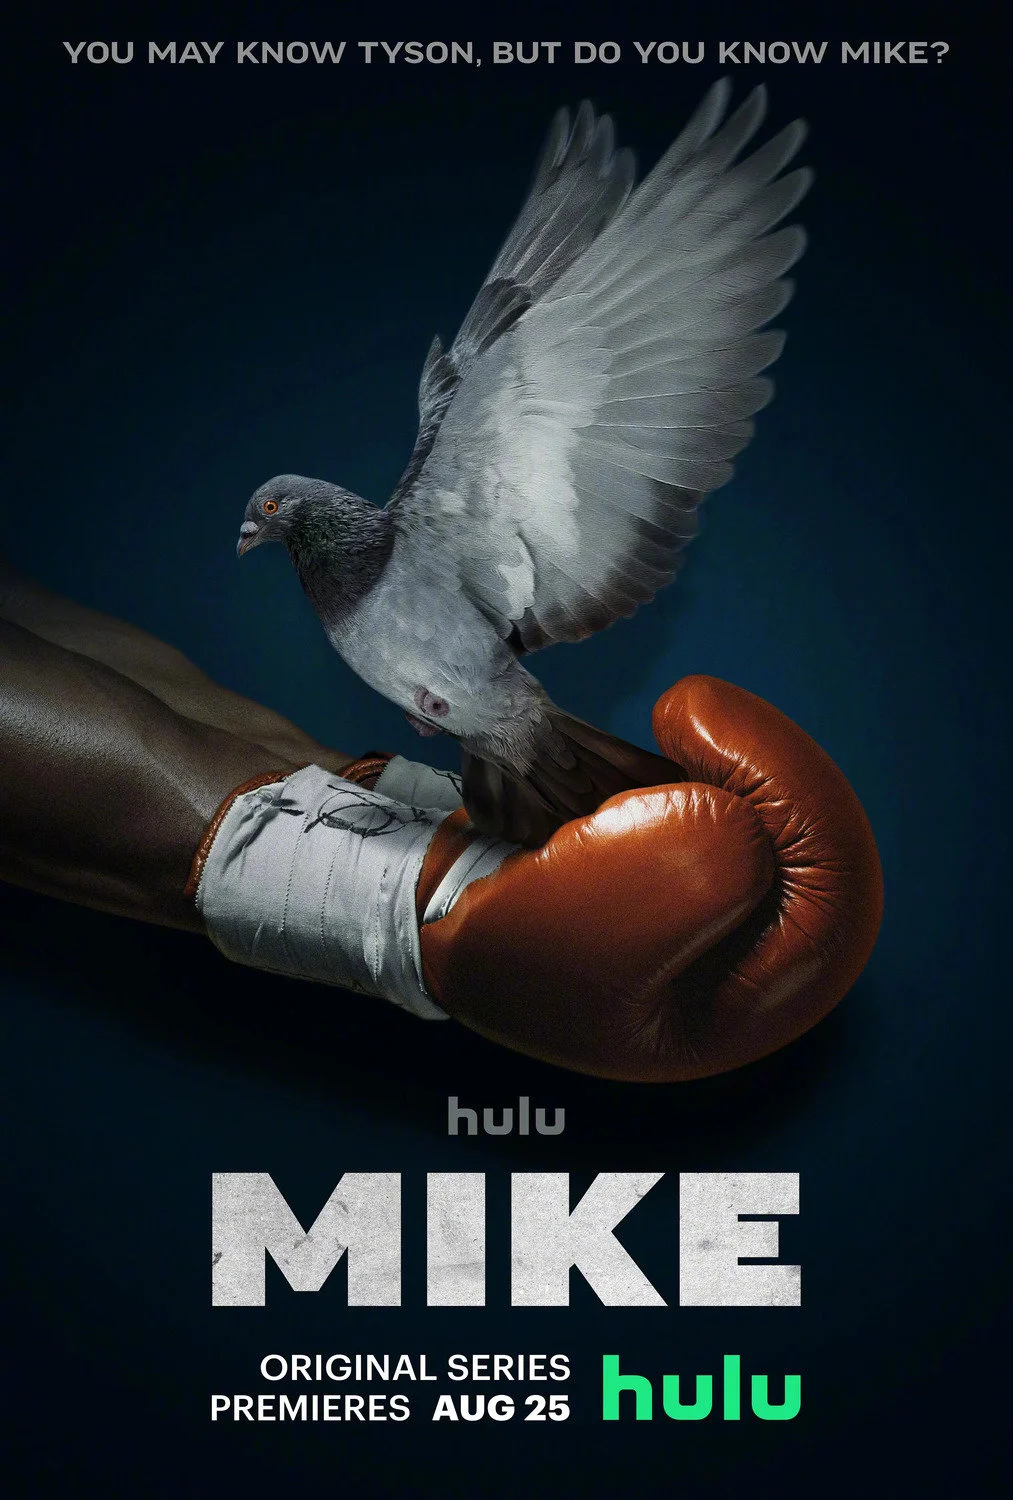 Mike Tyson biographical series "Mike" released a teaser trailer and poster, it will be launched on August 25 on Hulu